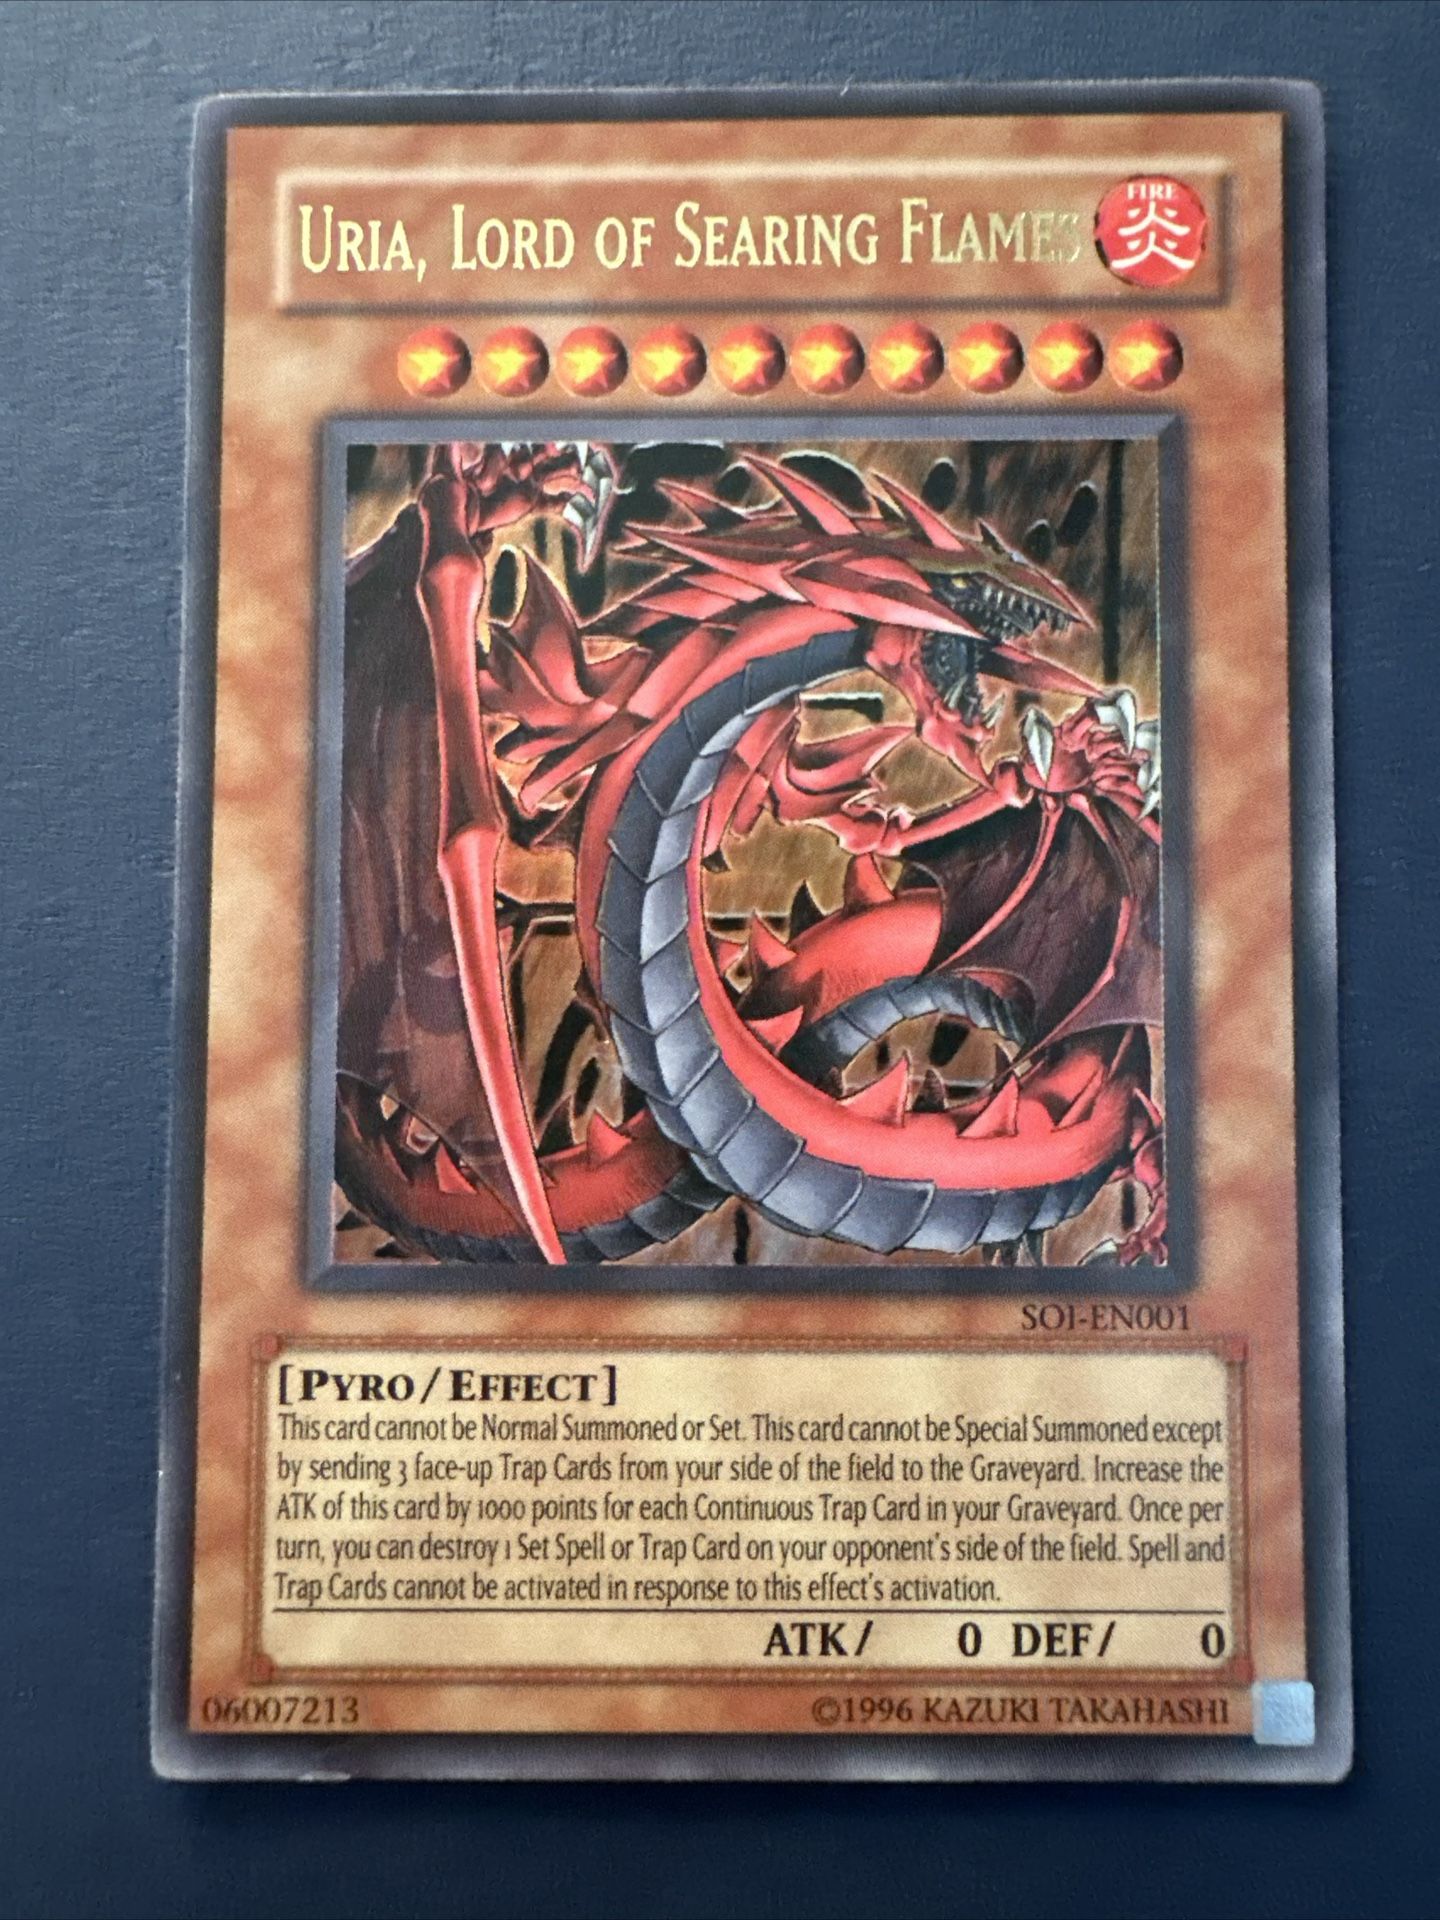 yugioh card, Uria, Lord of Searing Flames- 1st edition